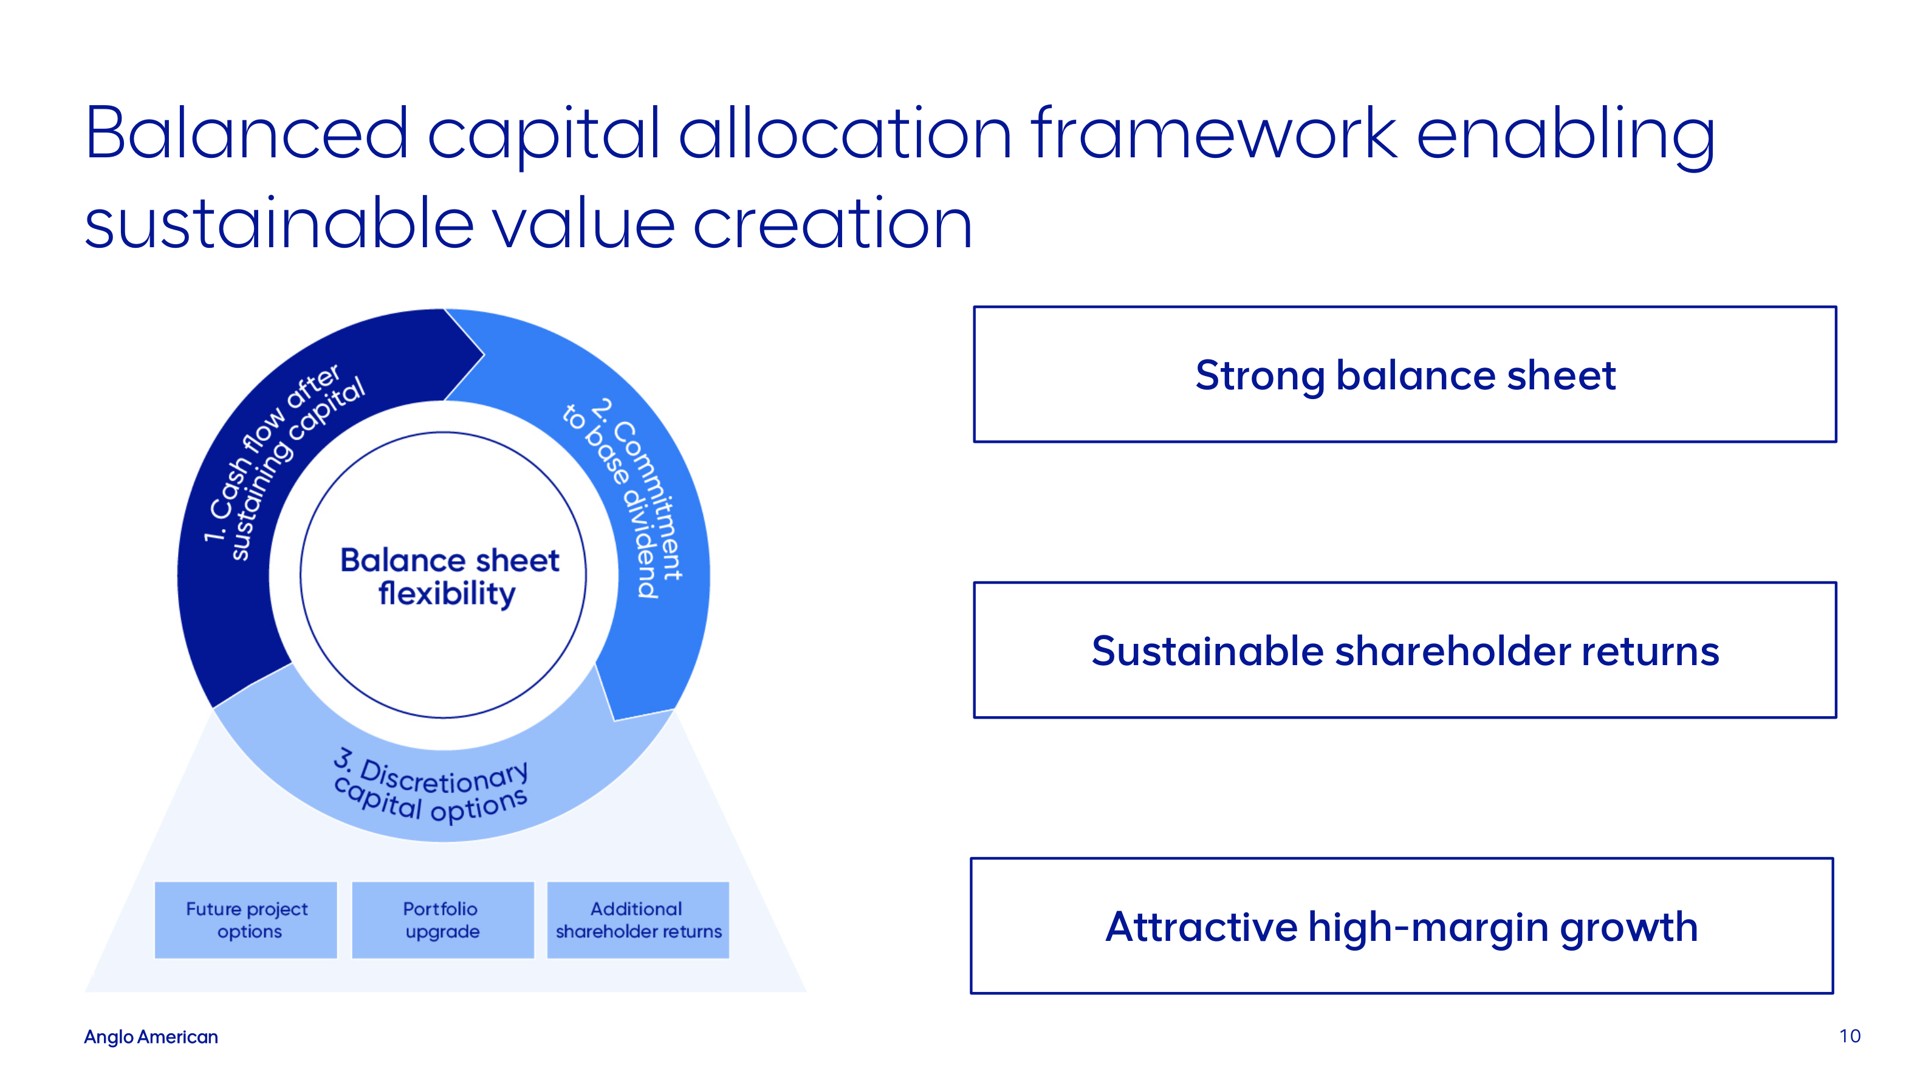 balanced capital allocation framework enabling sustainable value creation | AngloAmerican